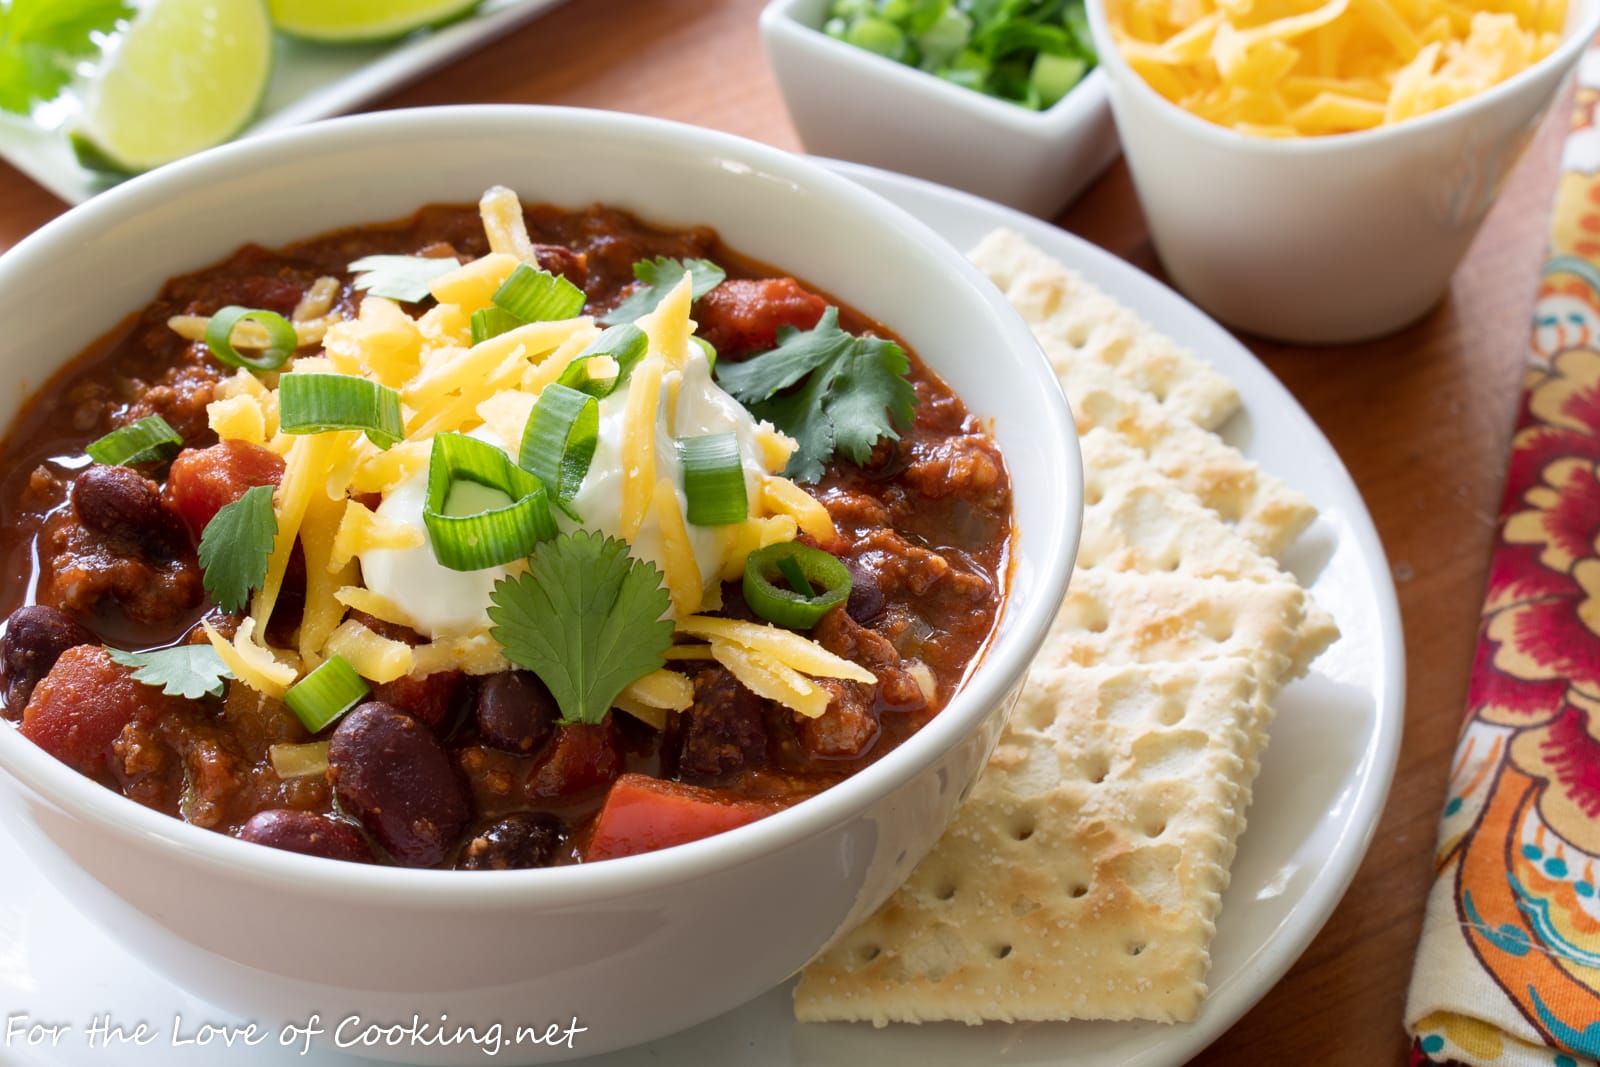 Beef Chili With Kidney Beans For The Love Of Cooking